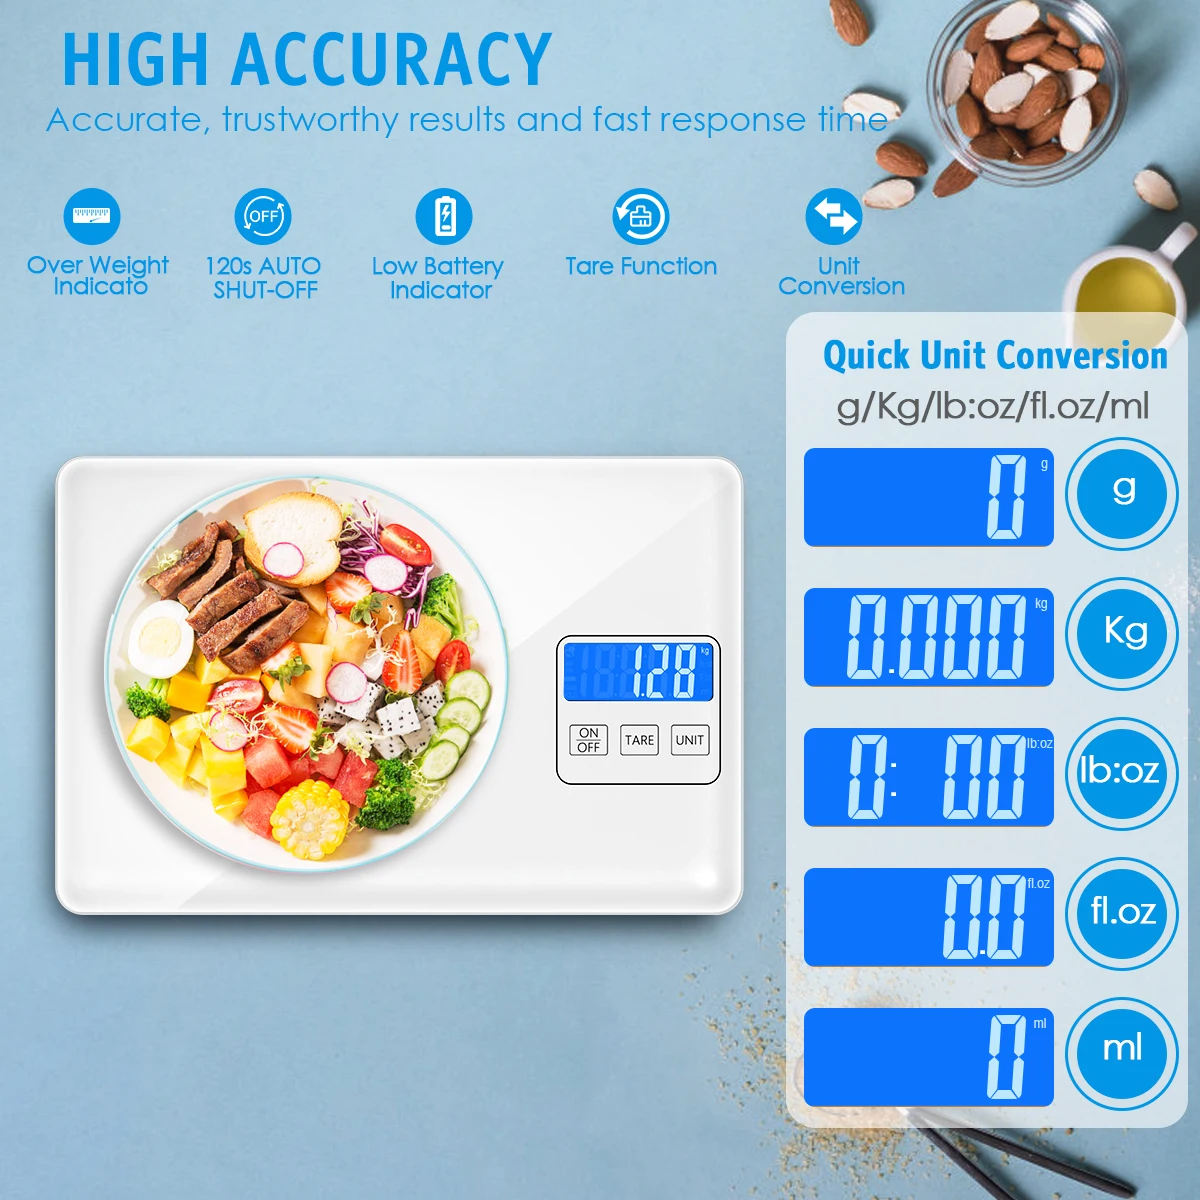 https://ae01.alicdn.com/kf/Hfabf95a5910e40a4afddbb46643a9867M/ORIA-Digital-Scale-15kg-1g-Rechargeable-Electronic-Kitchen-Scale-High-Precision-Food-Weighing-Scale-for-Baking.jpg